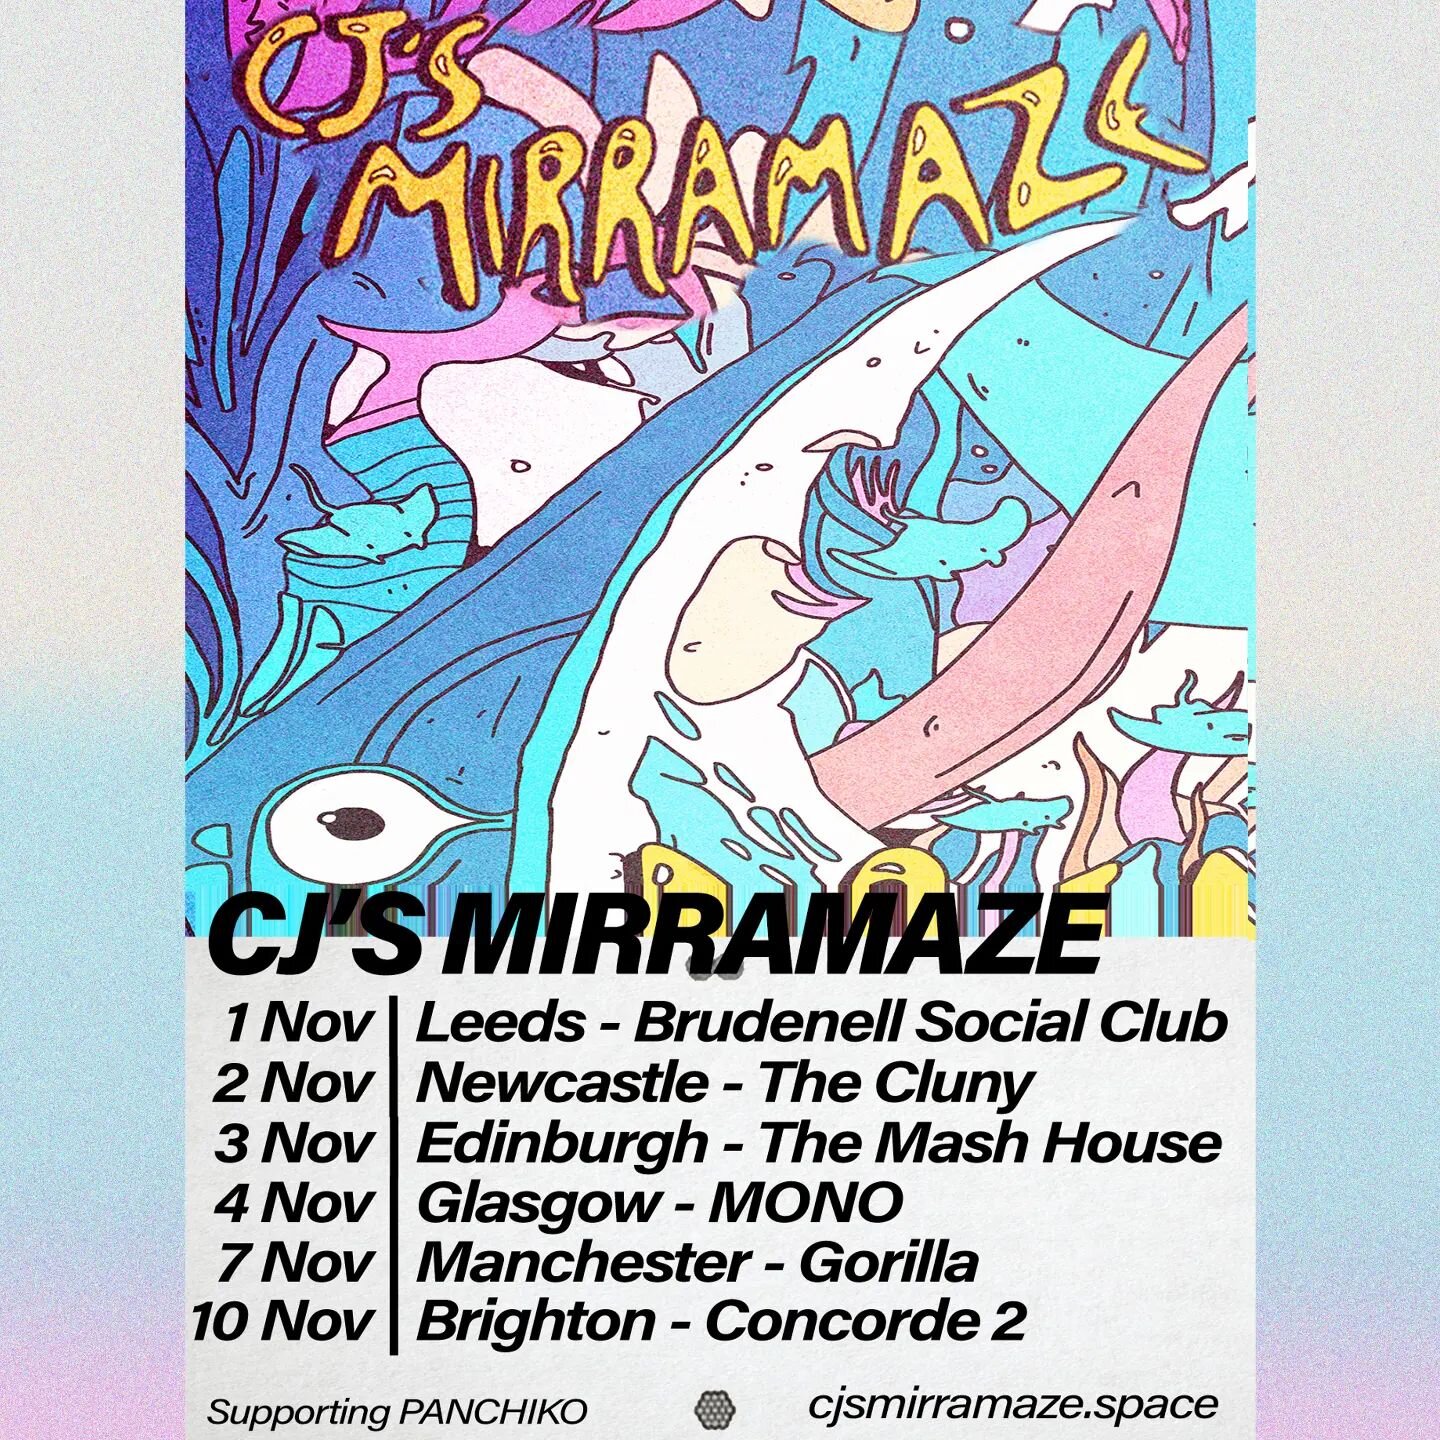 Deeelighted to announce a UK tour this NOV 💥

We are heading out again in support of our beloved pals  @panchiko_deathmetal 🙏

A handful of tix left for each venue - ticket link in bio

Some new tunes (full announcement coming v. soon!) &amp; some 